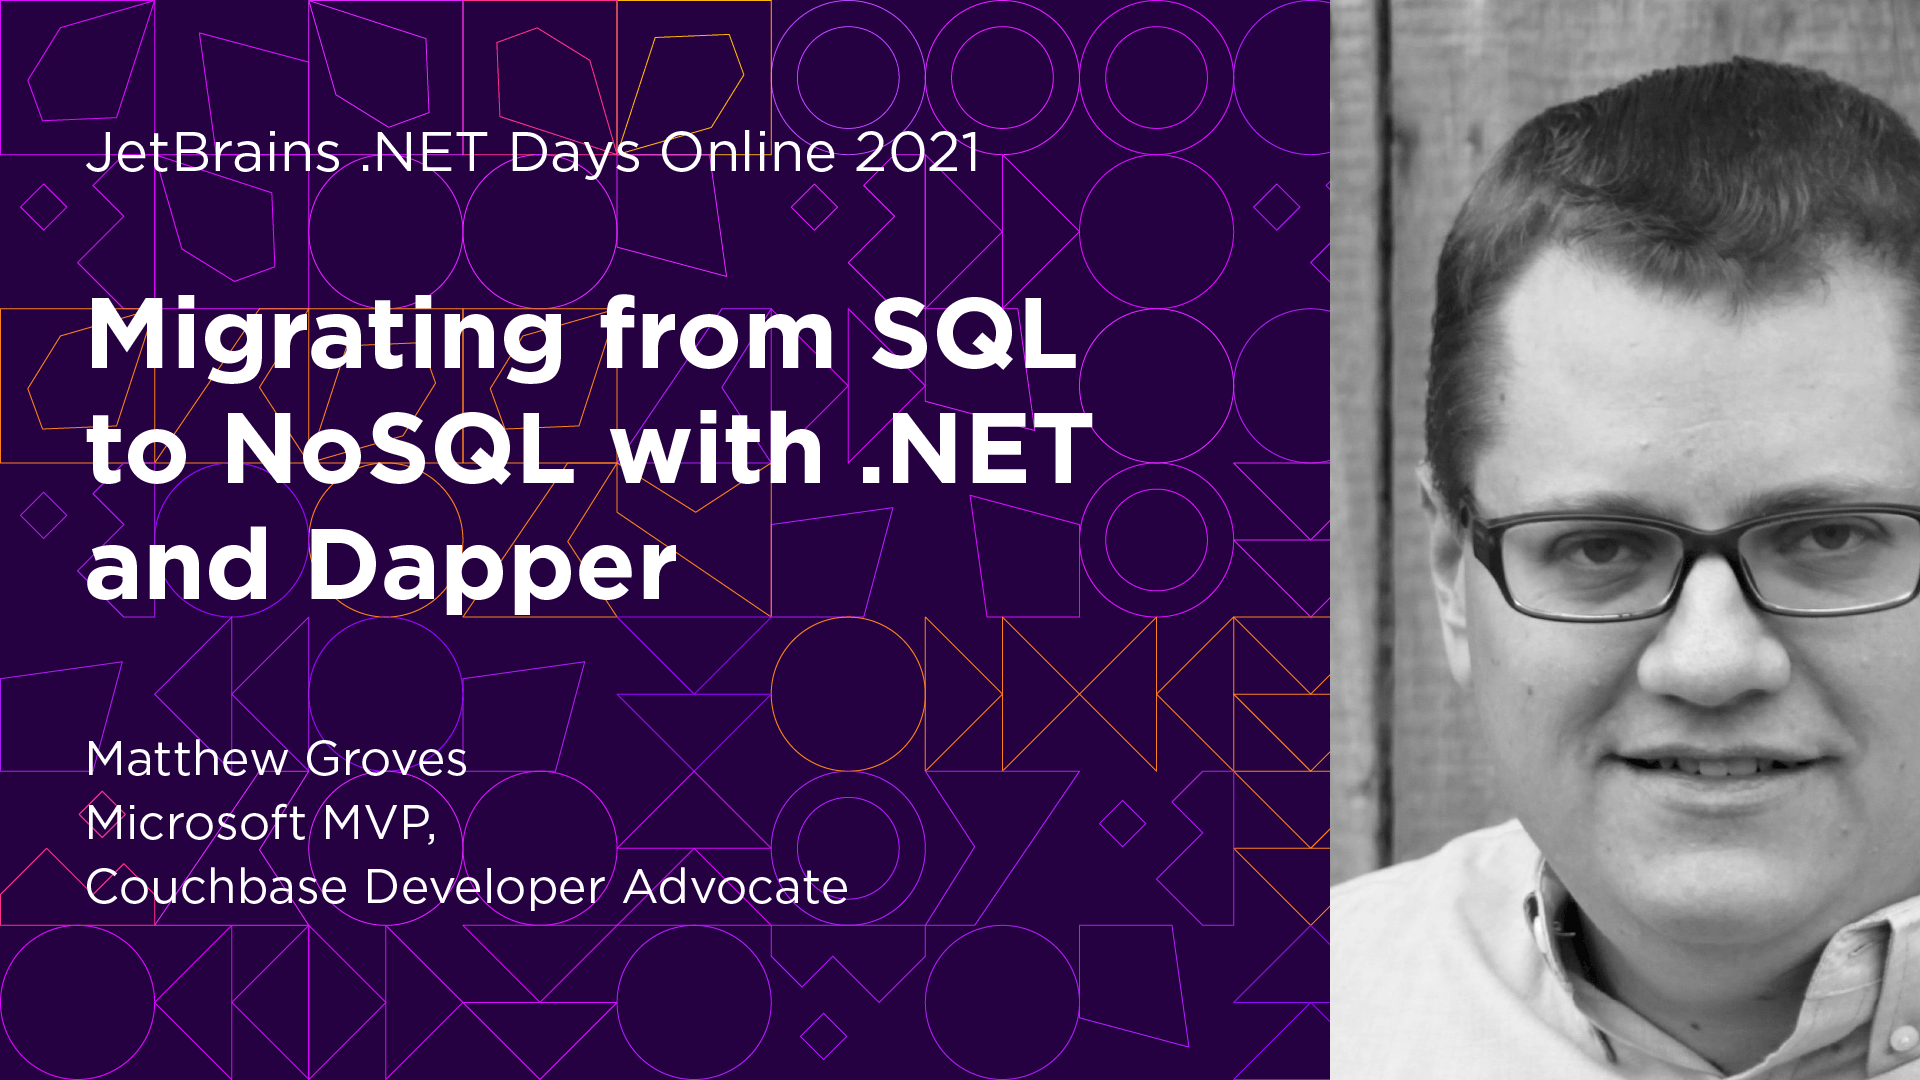 Migrating from SQL to NoSQL with .NET and Dapper